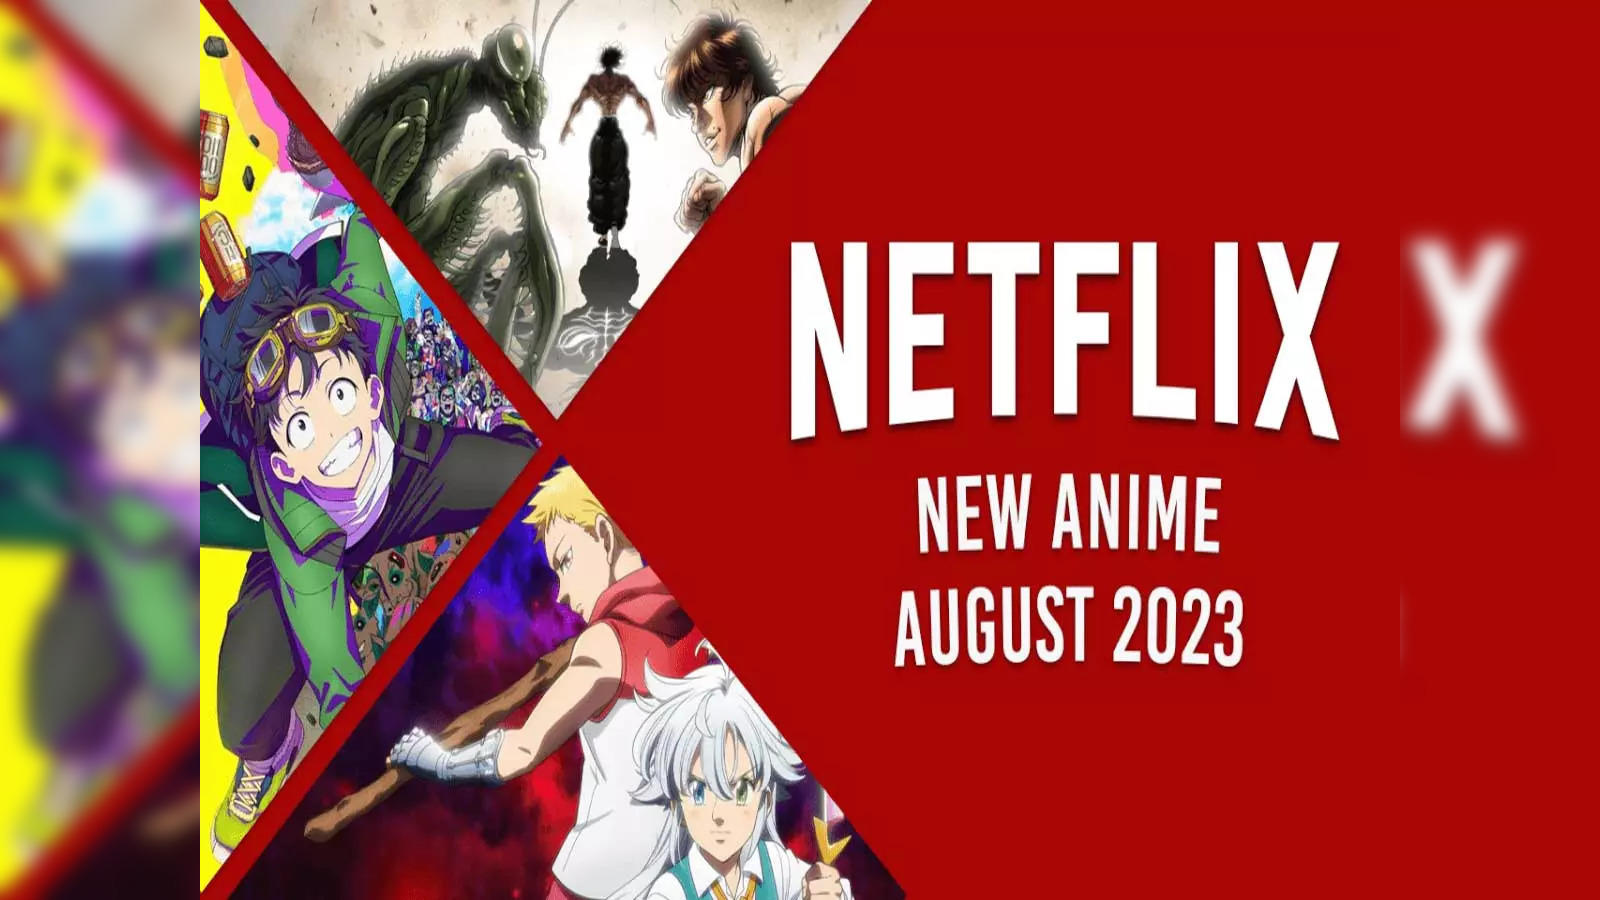 5 Most Anticipated Anime Titles Coming to Netflix in 2023 - What's